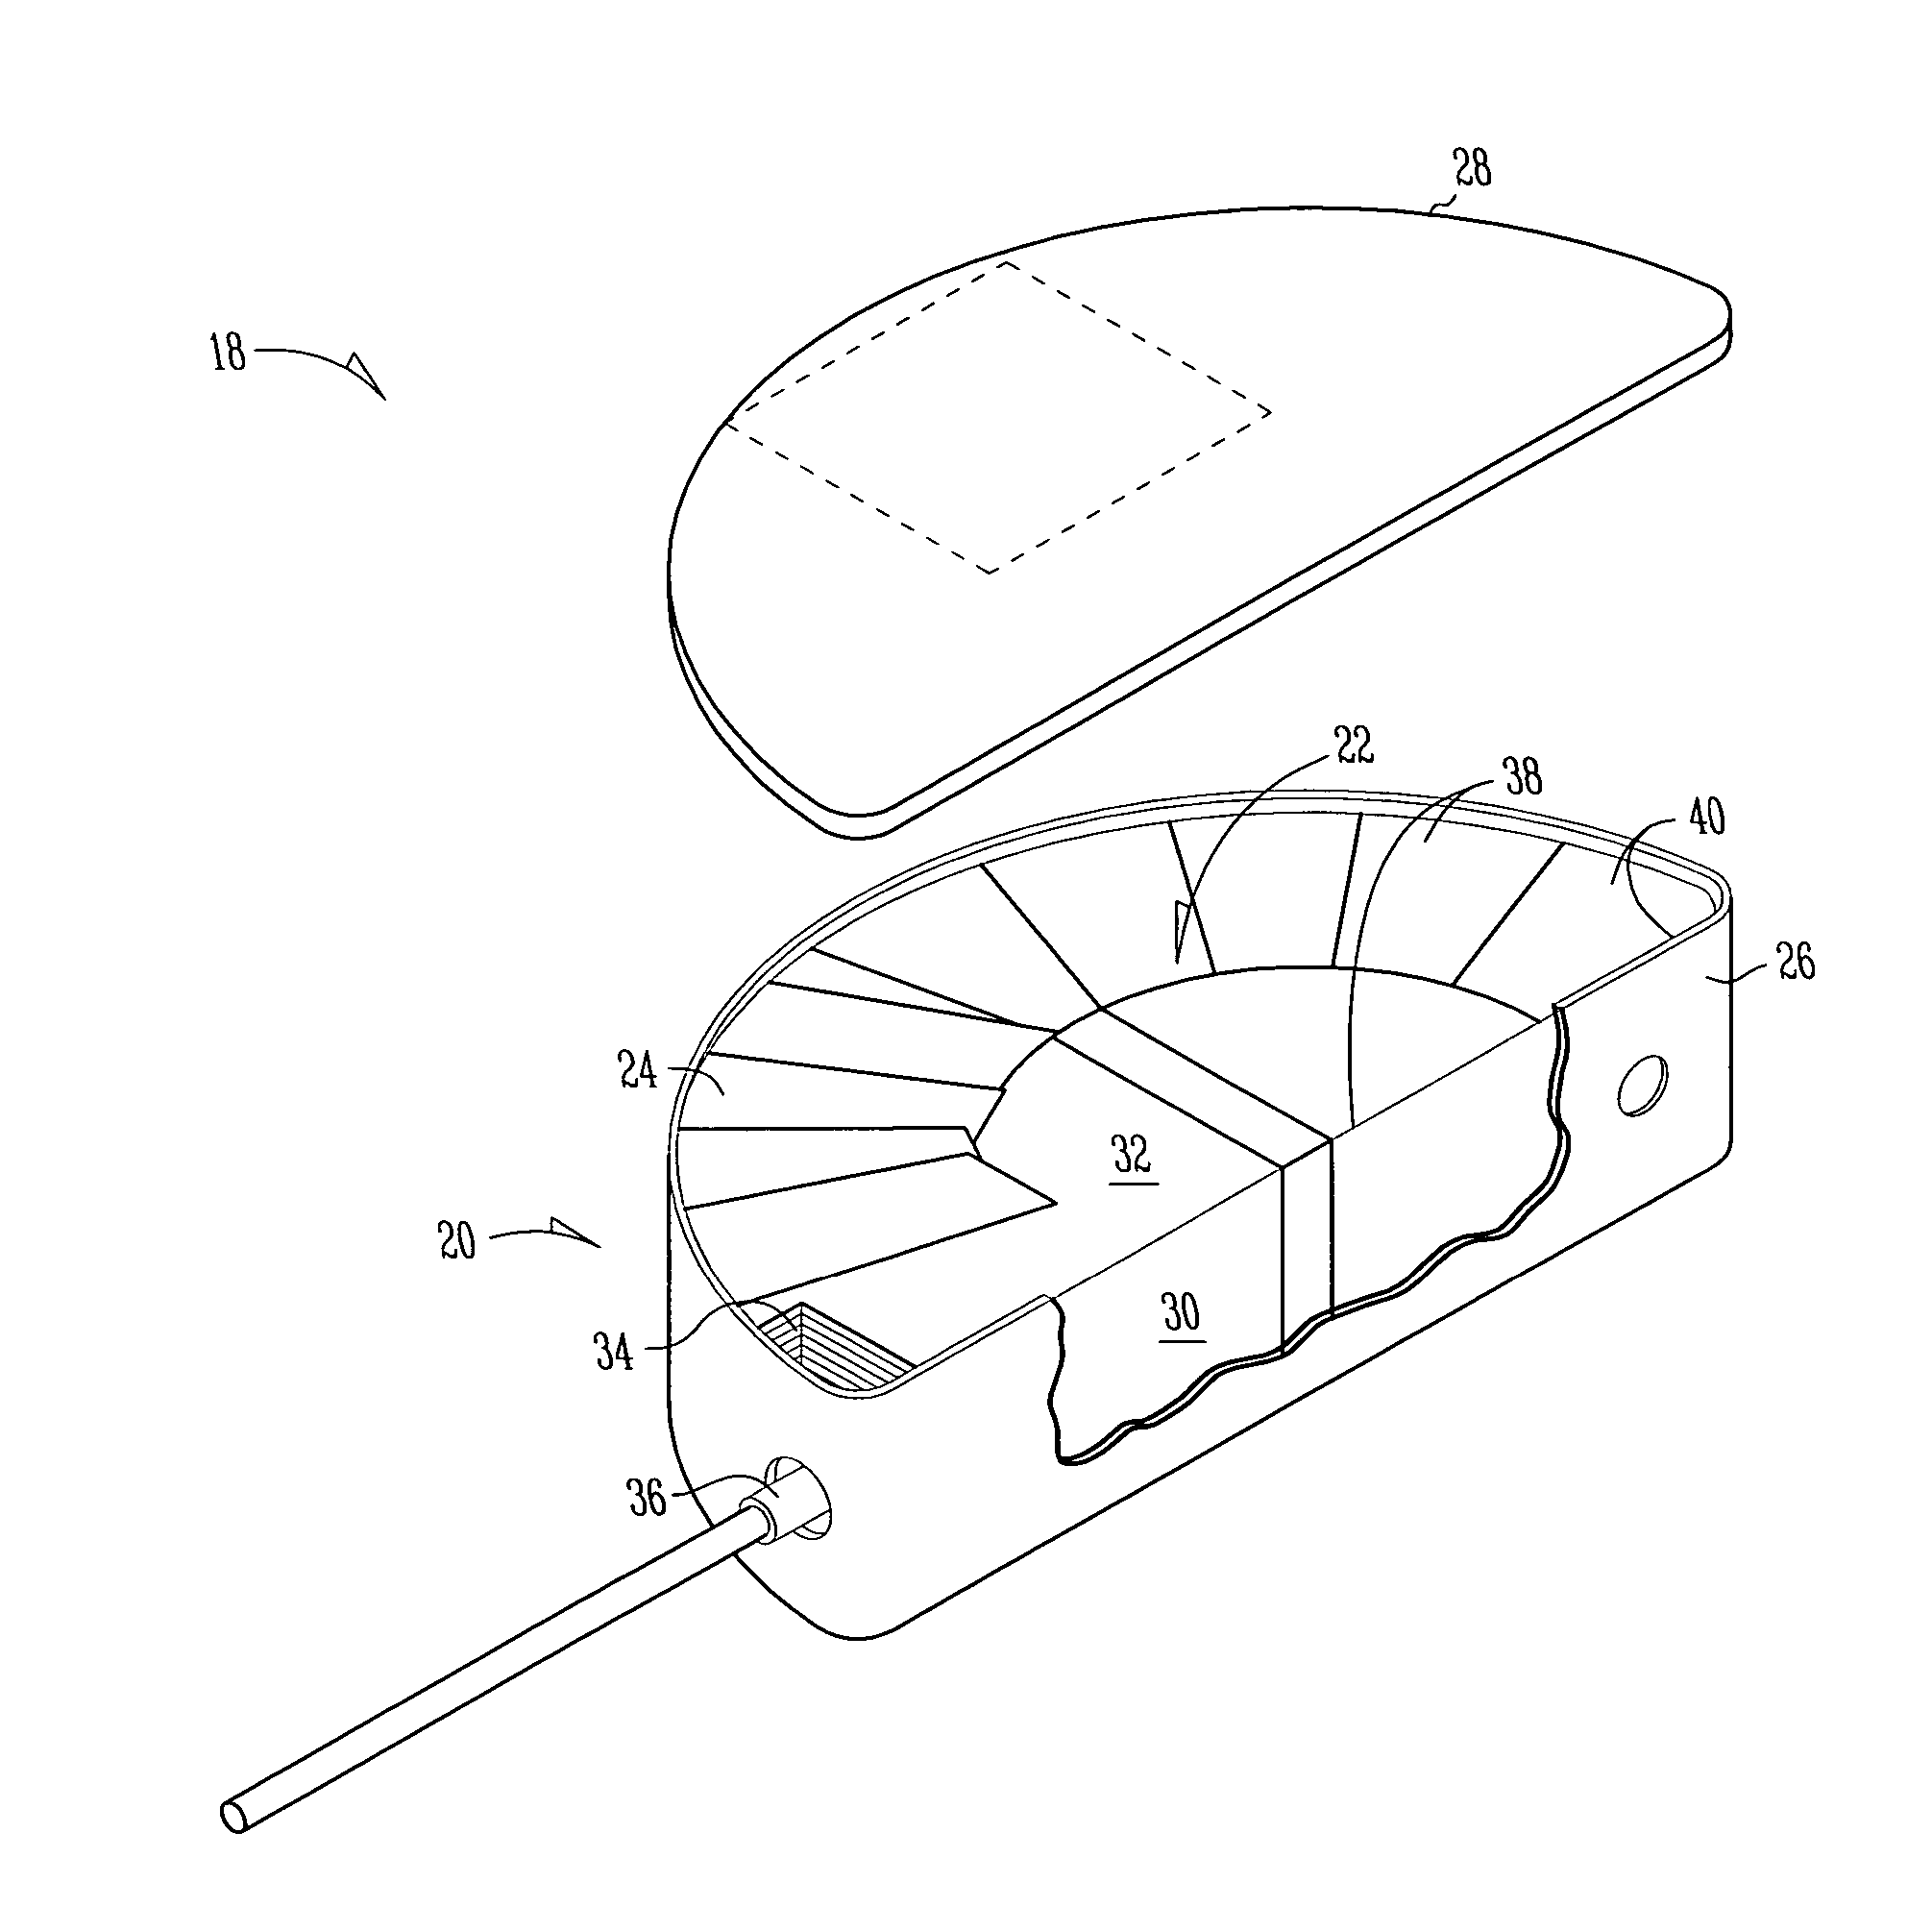 Method of constructing a capacitor stack for a flat capacitor